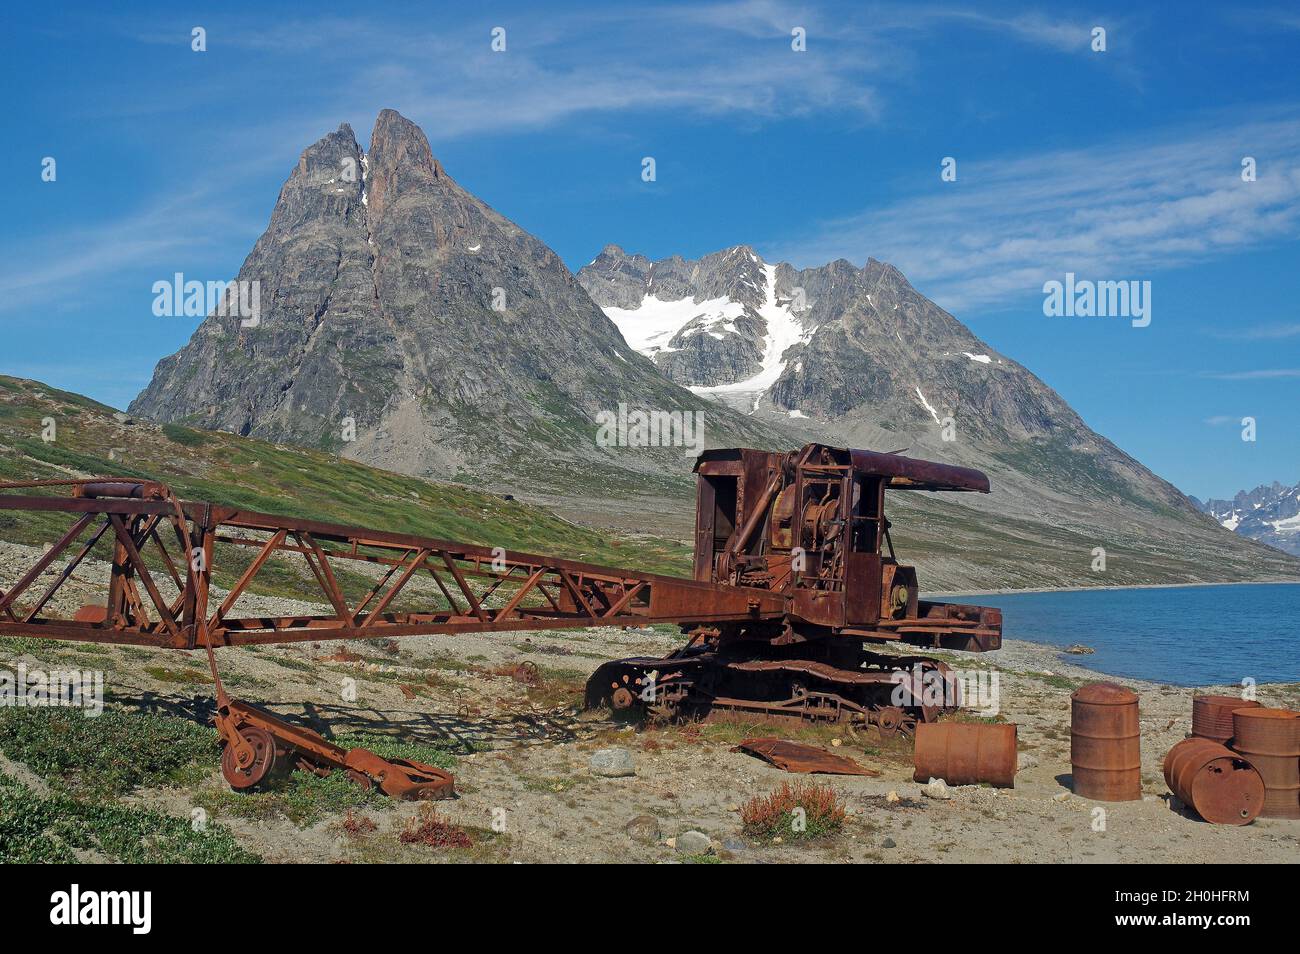 Rusted army vehicles and barrels from 1947, Ikateq army base, Greenland, North America, Denmark Stock Photo